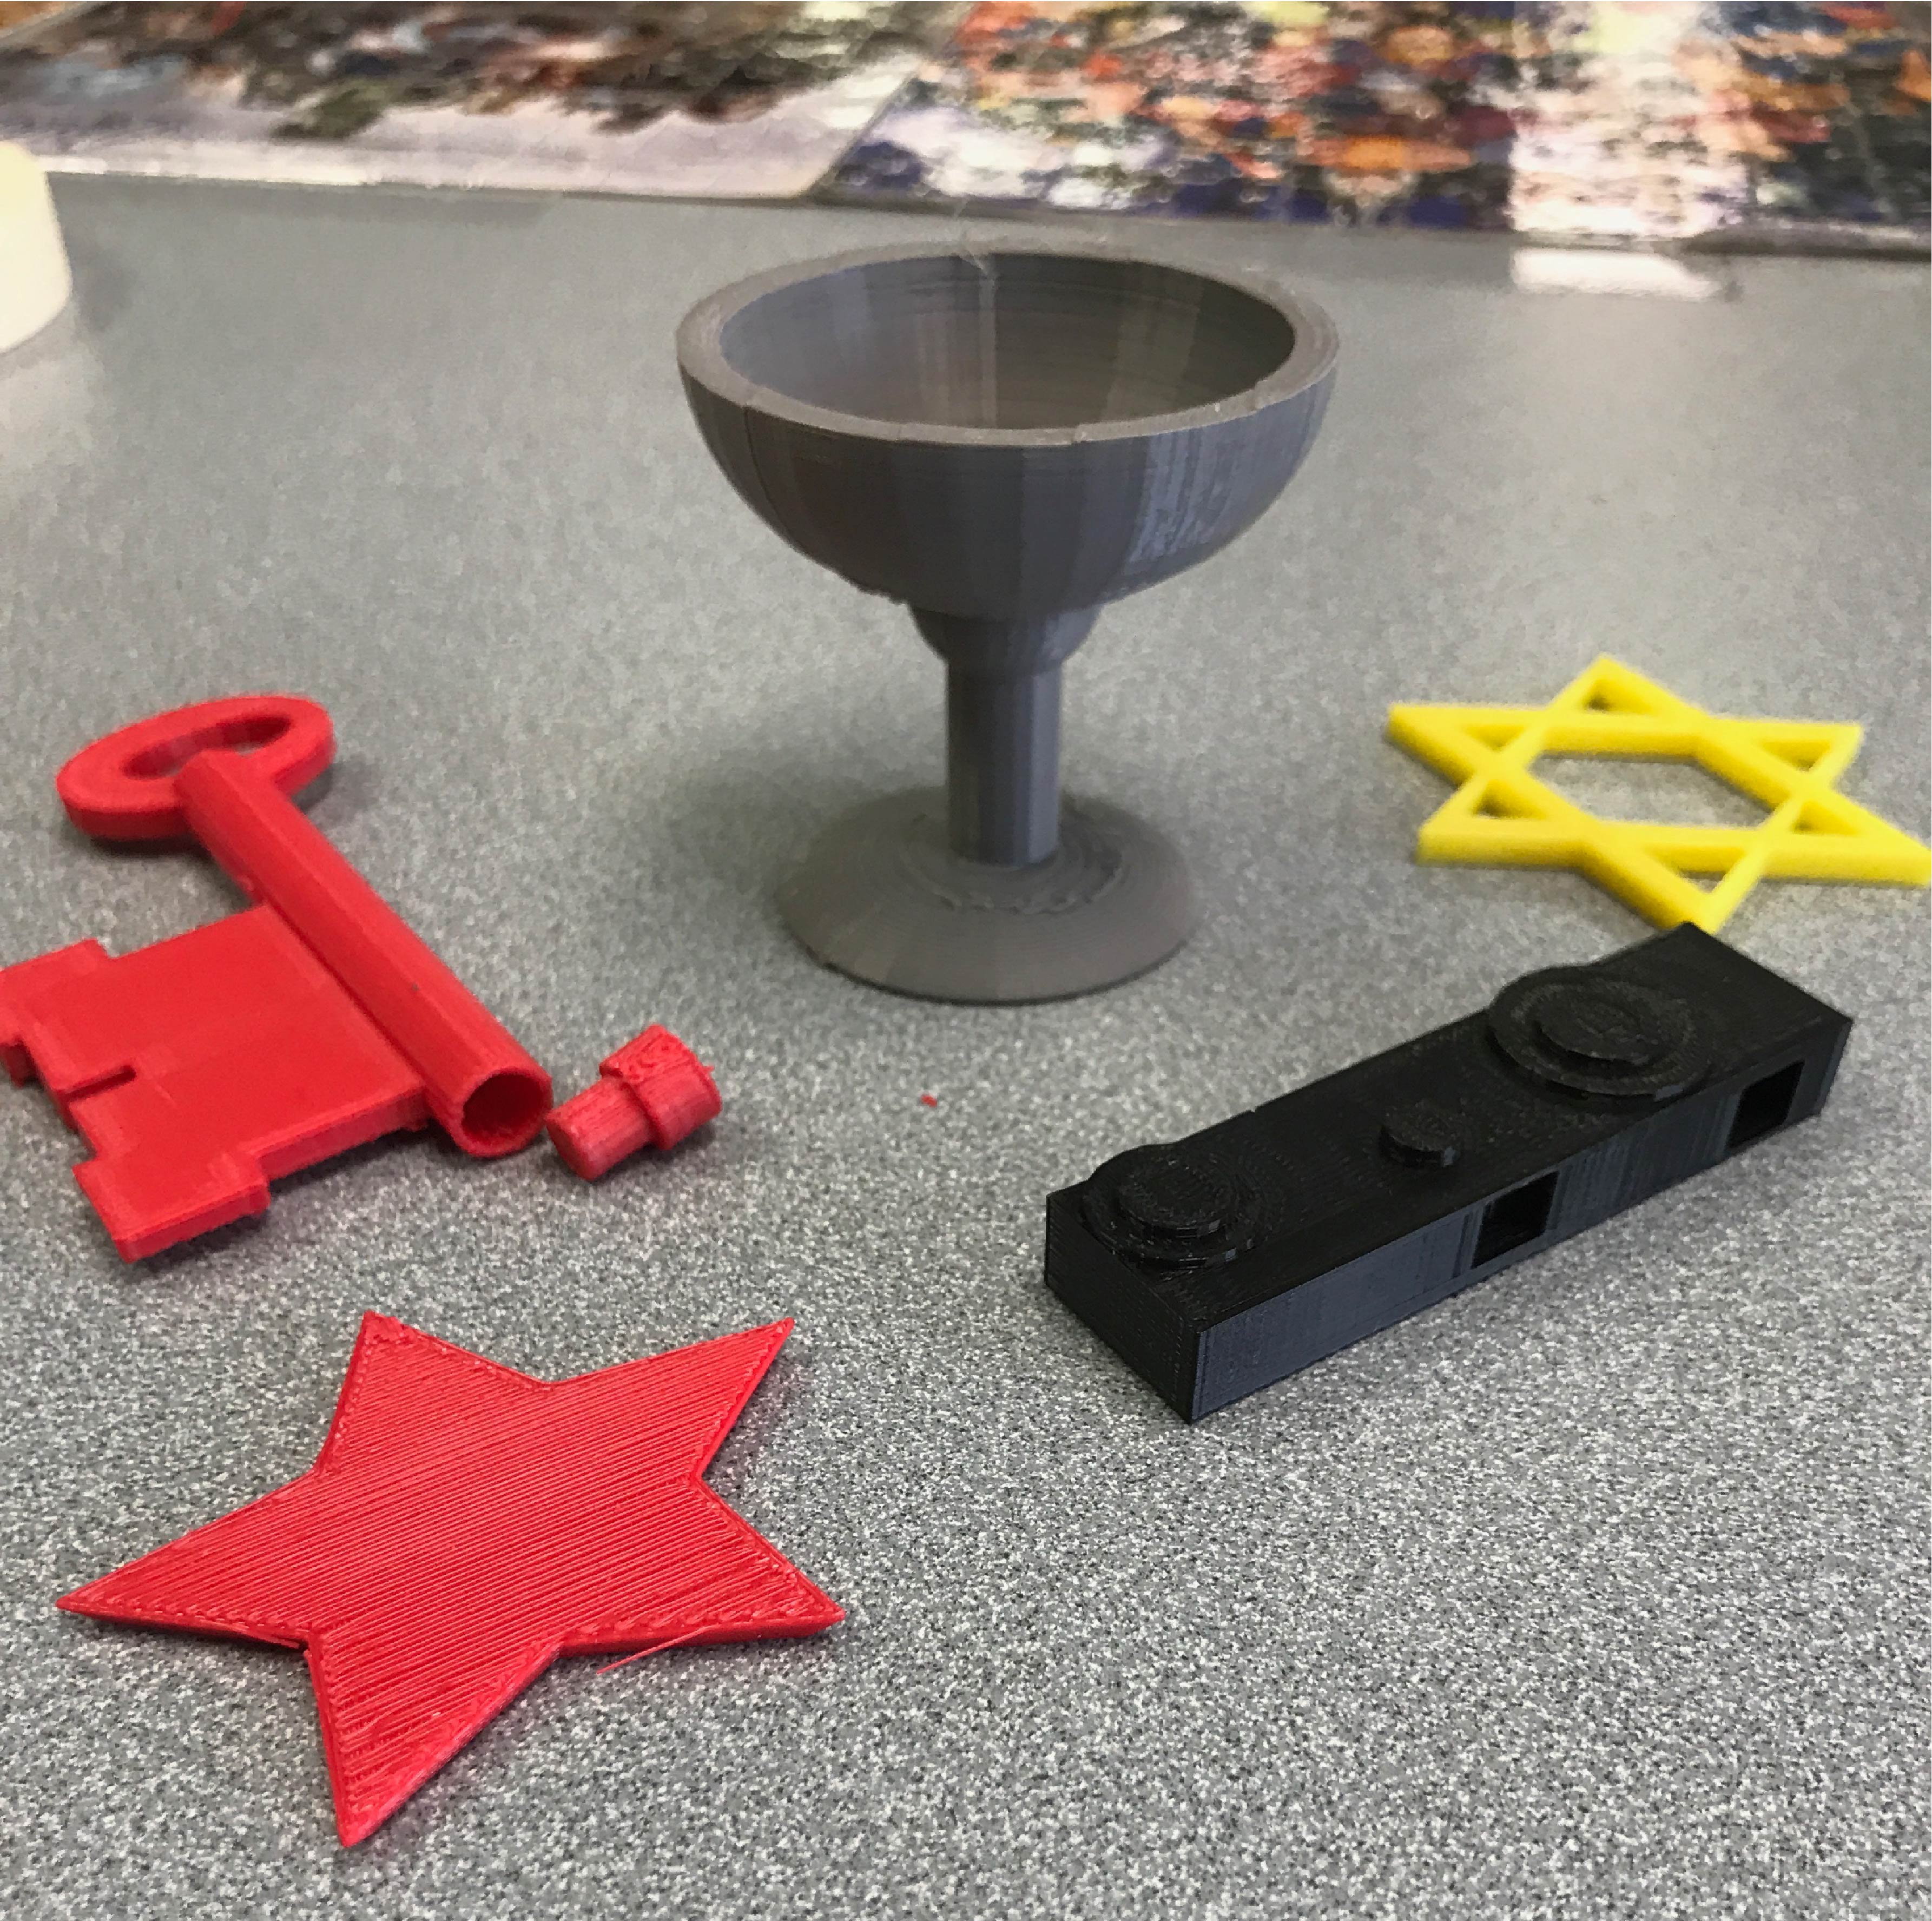 3D printed objects: Chalice, Star of David, hollow spy key, spy camera and star